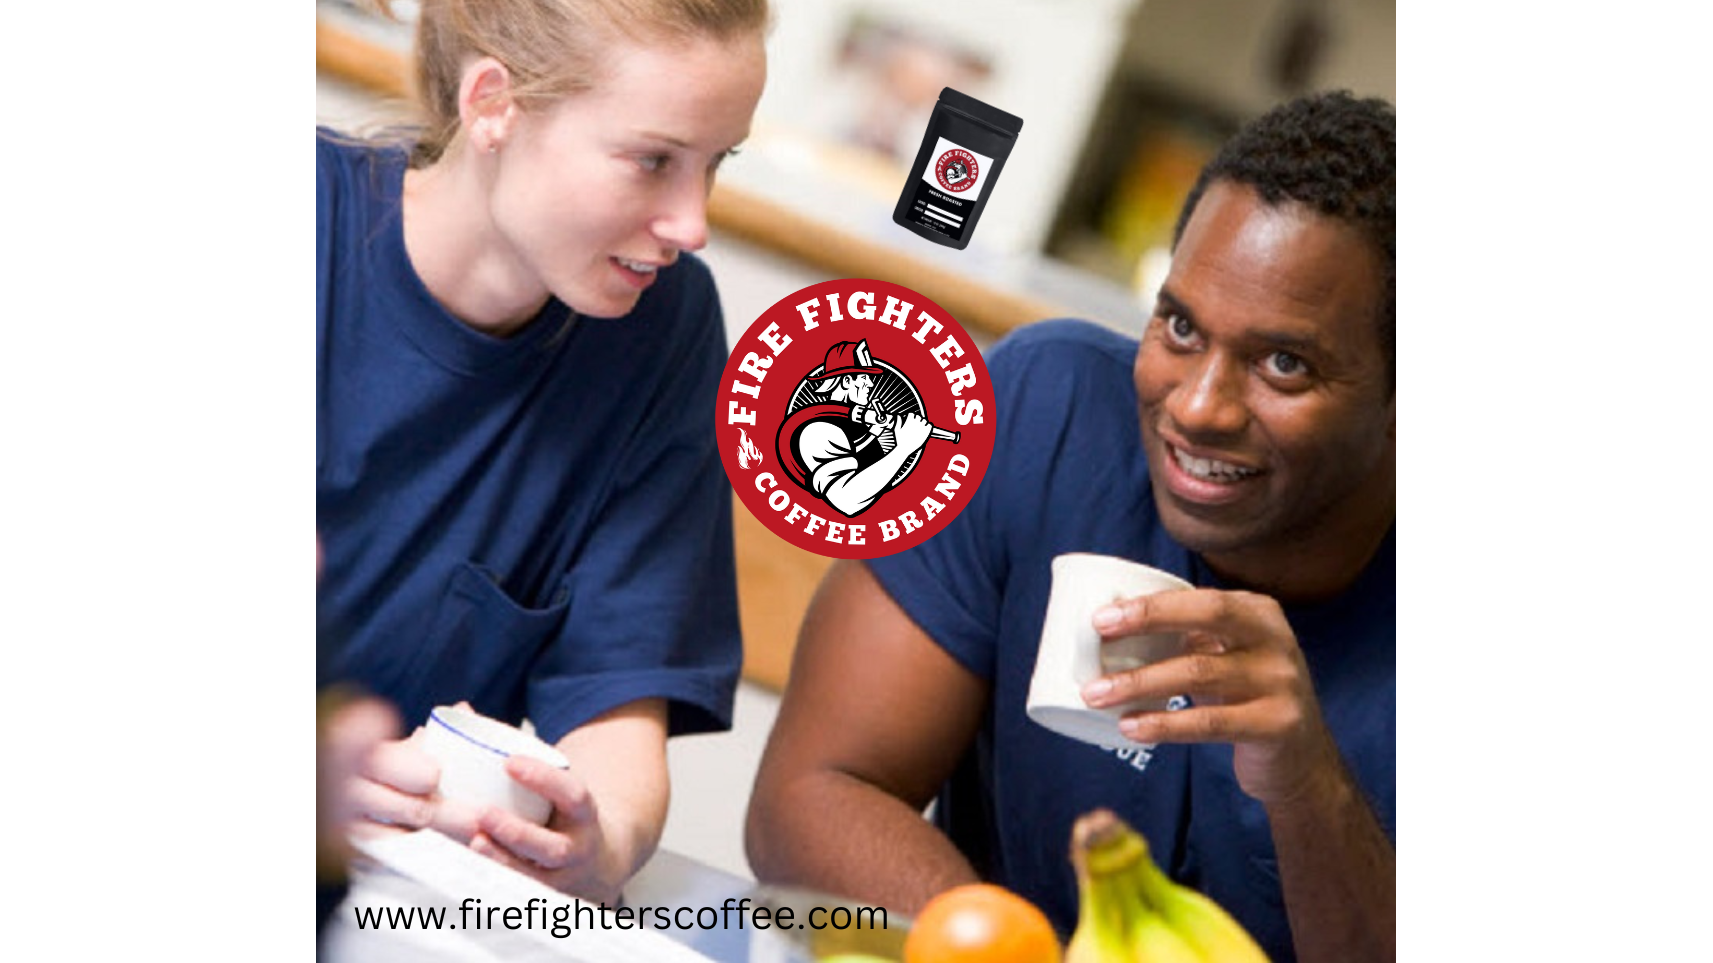 By Premium Coffee Blends & Support Firefighters: Get A 40% Special Discount